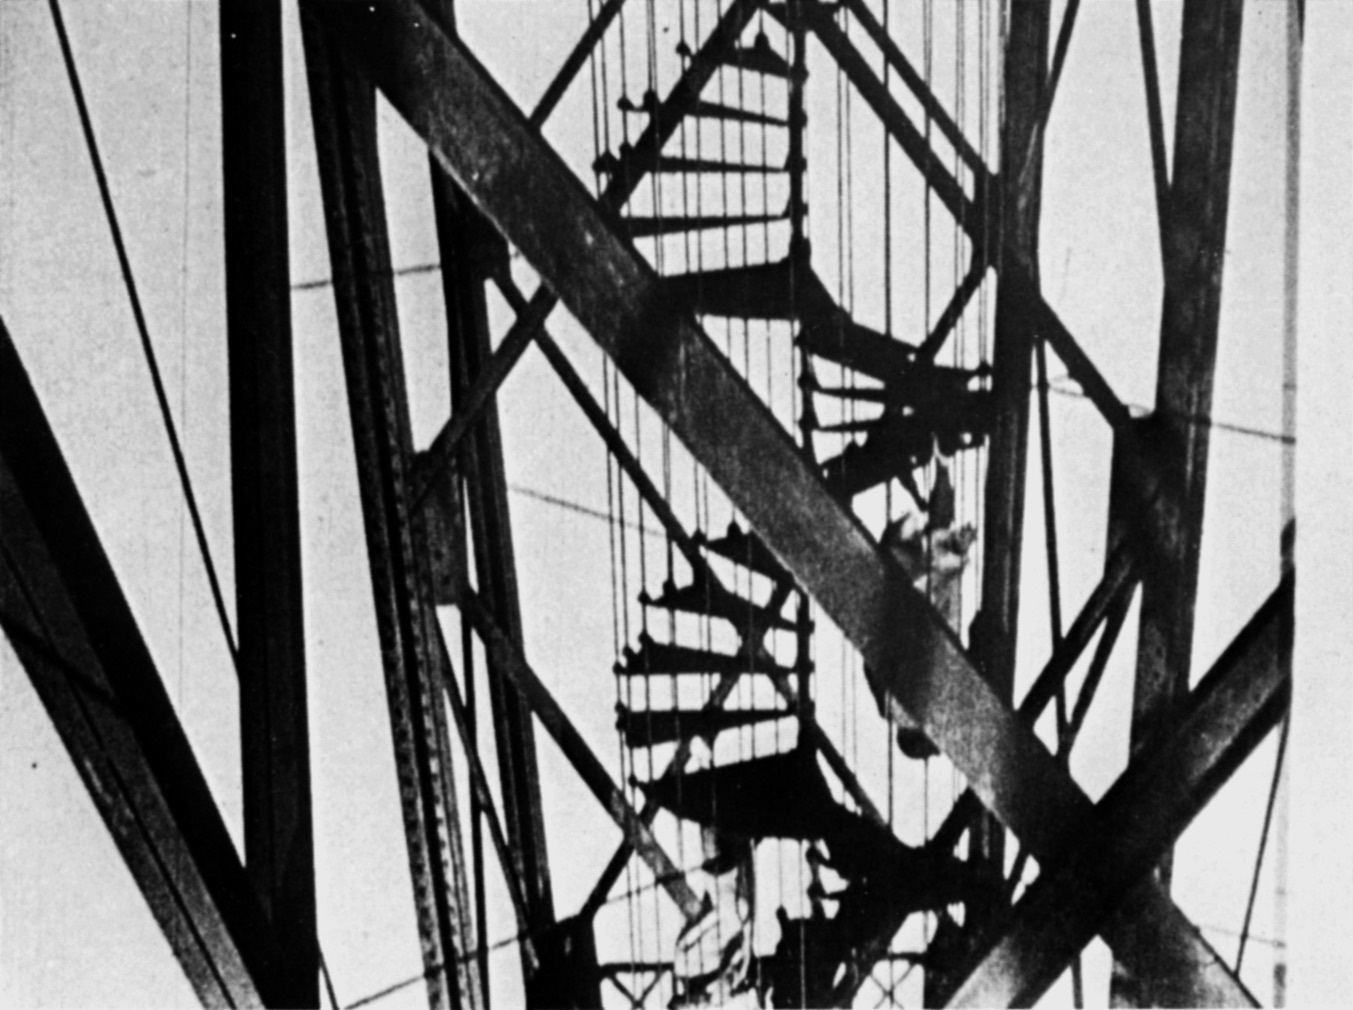 Still from the black and white film "Alter Hafen in Marseille" by Moholy-Nagy from the 1930s.